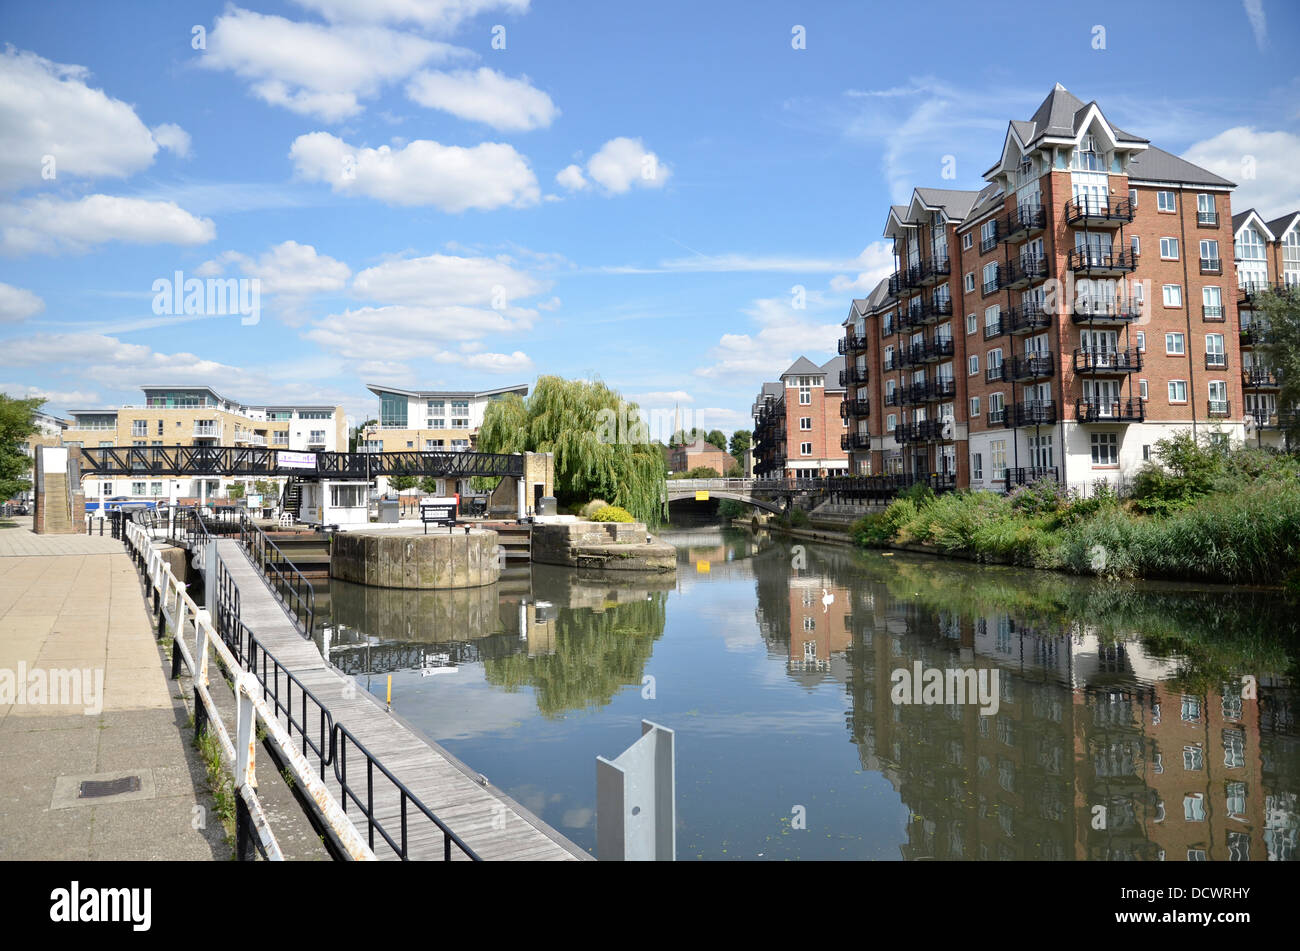 The Grand Union canal basin in Brentford, west London Stock Photo